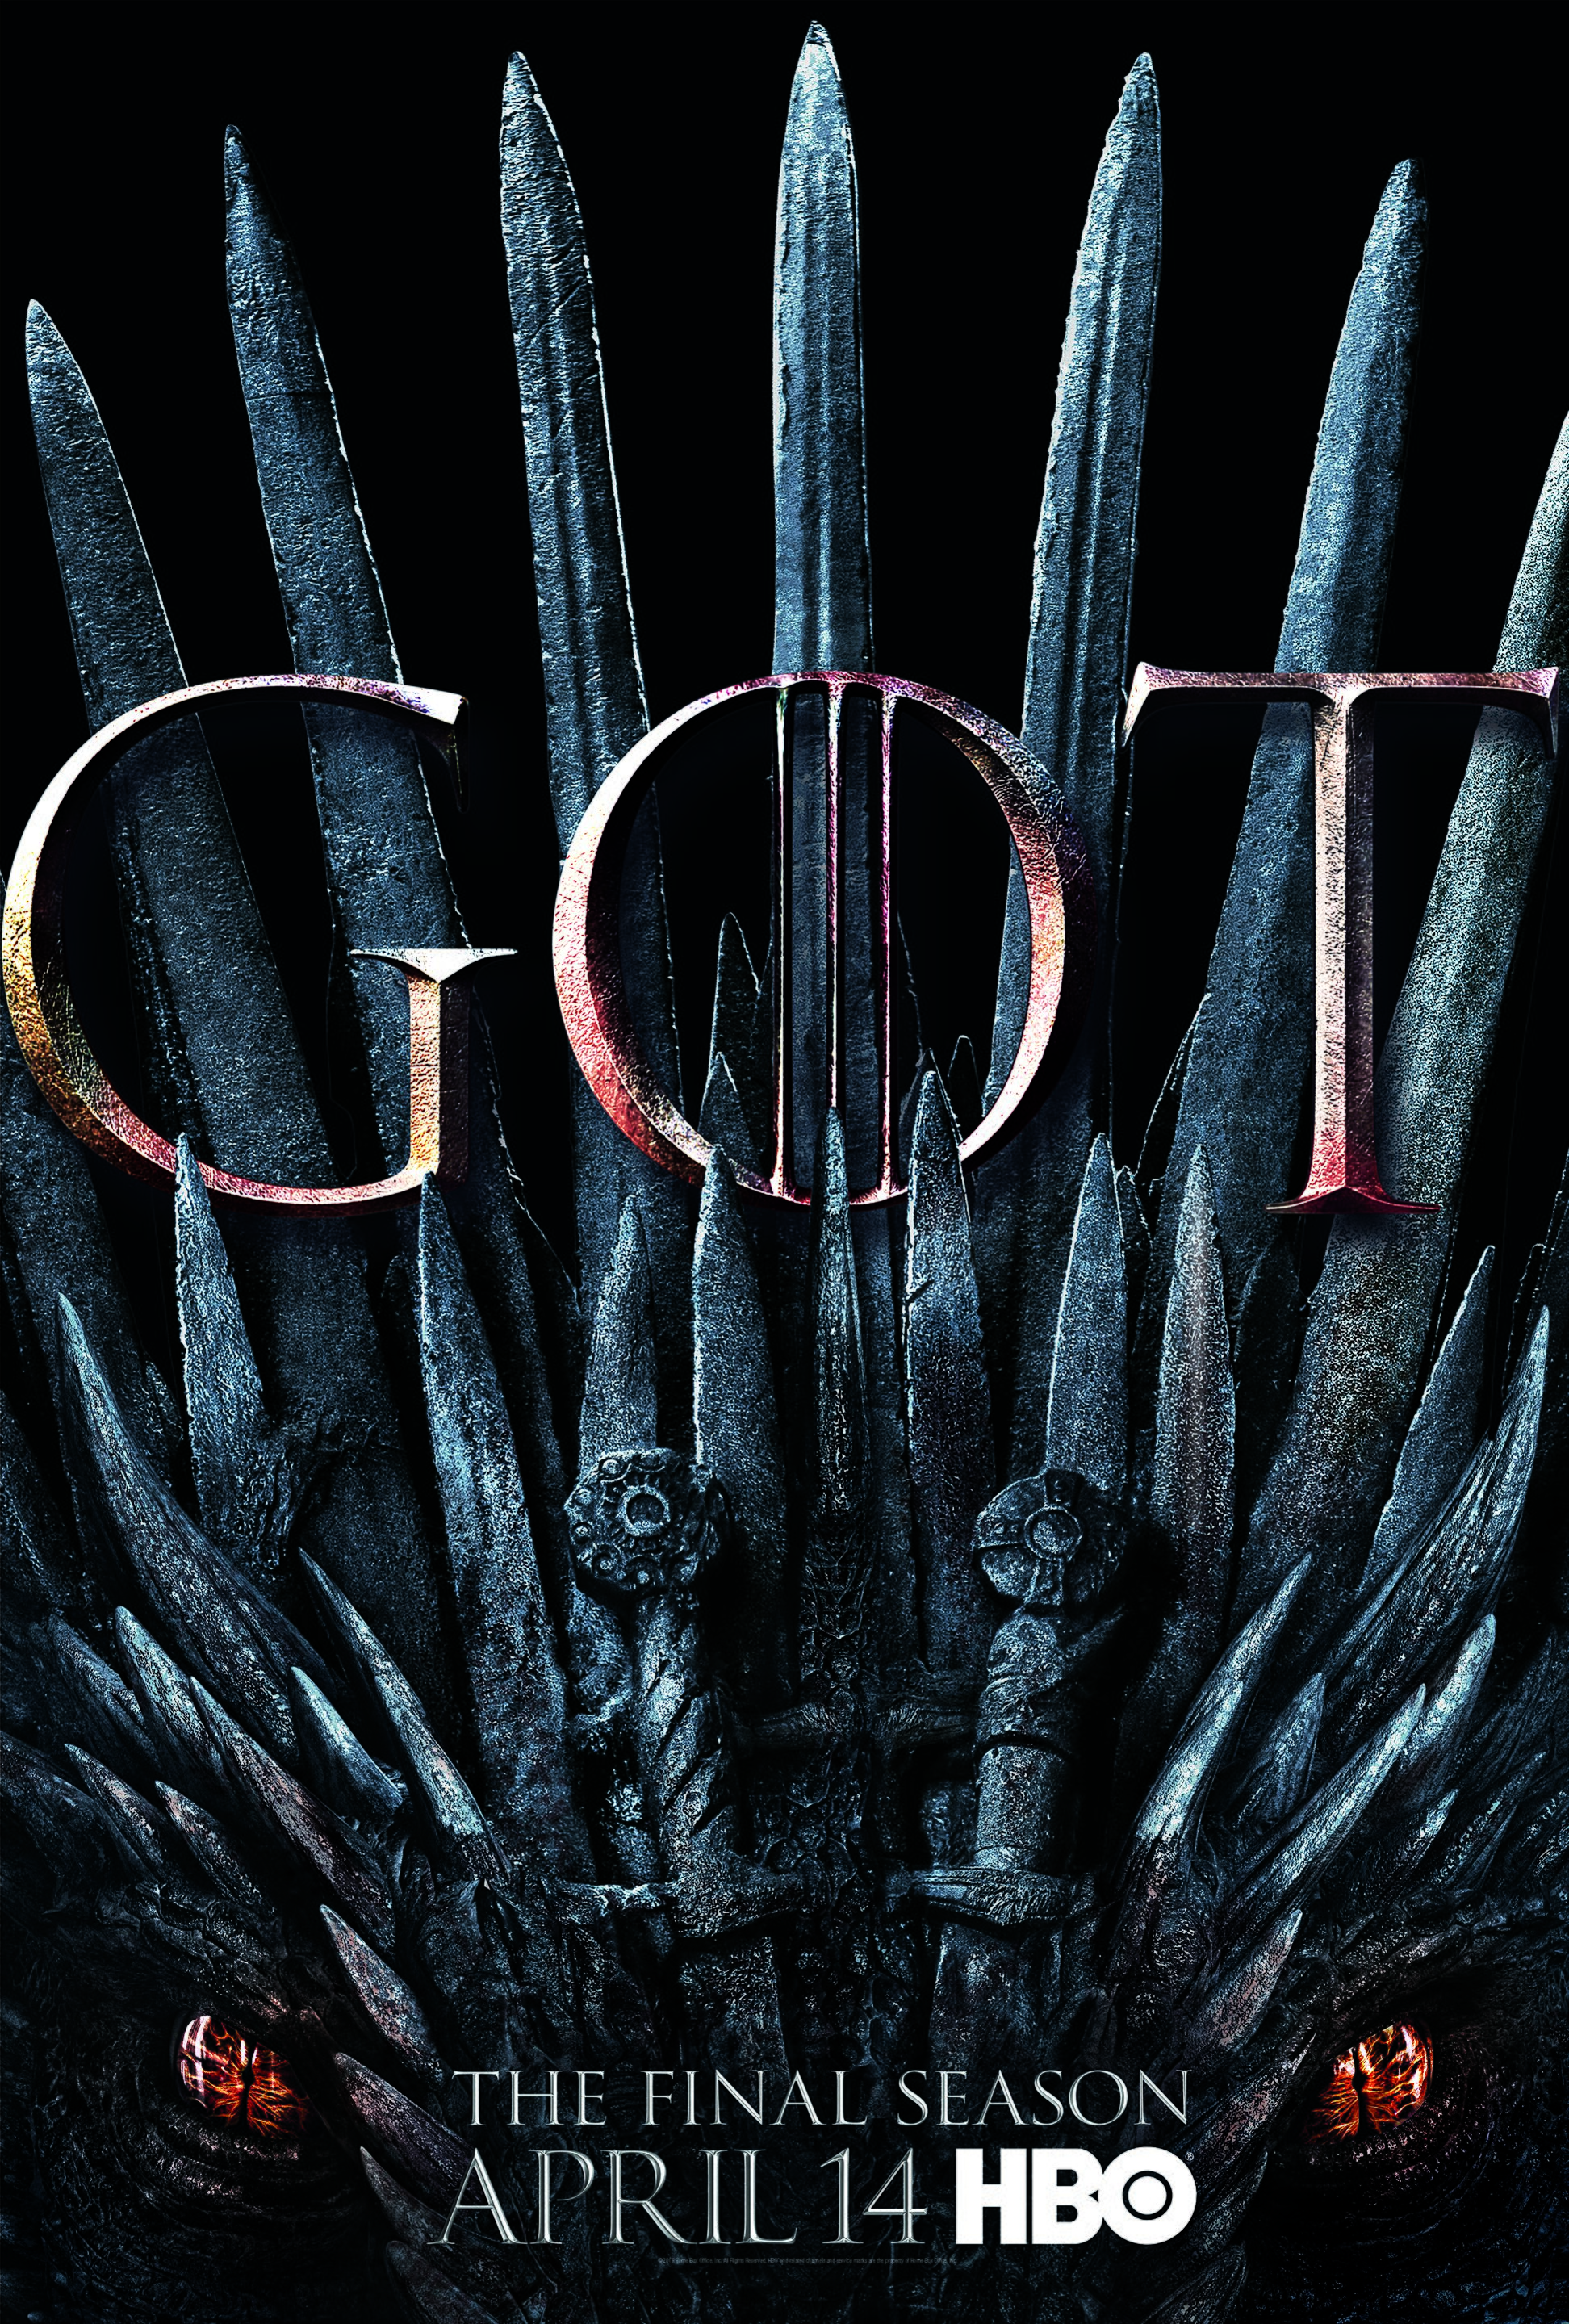 HBO reveals official key art for Game of Thrones season 8